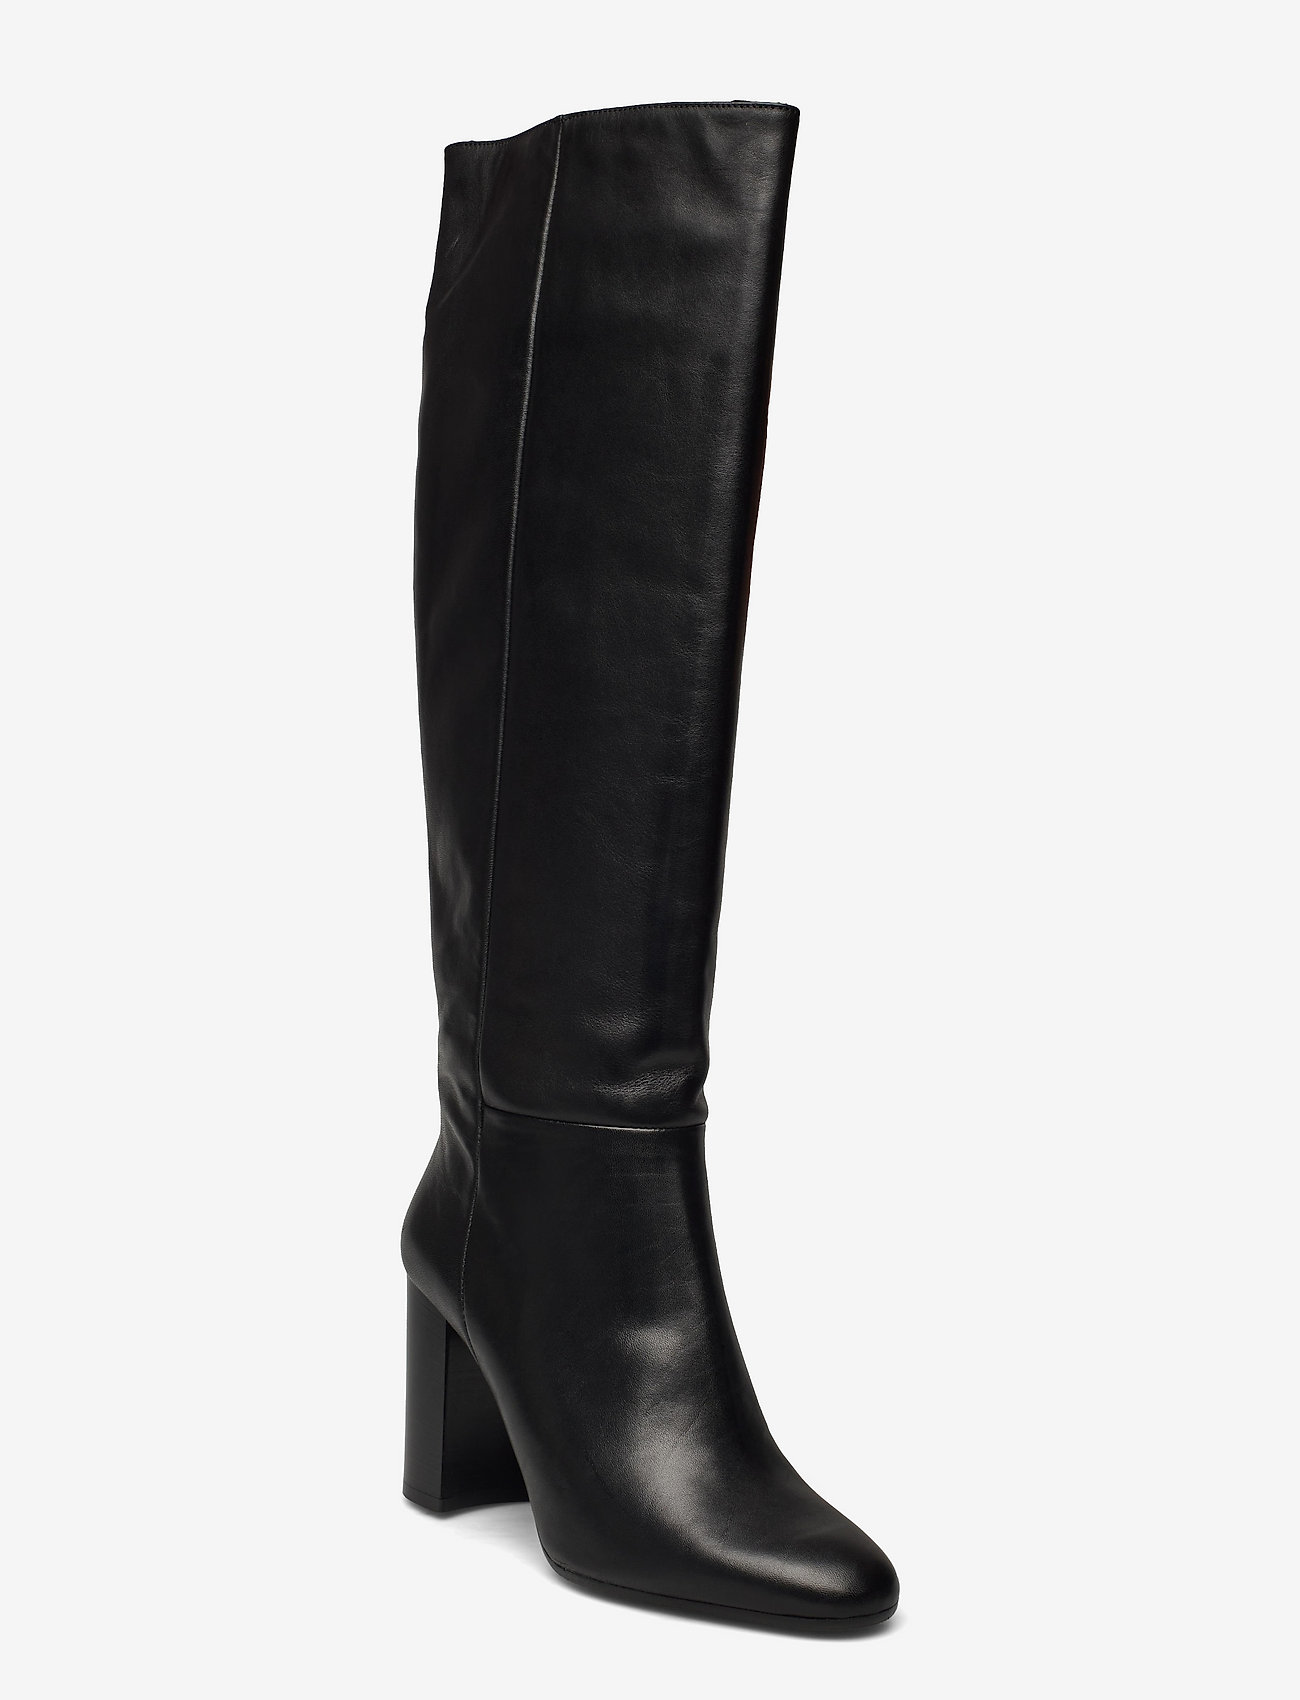 Apair - New long classic boot - knee high boots - nero - 0